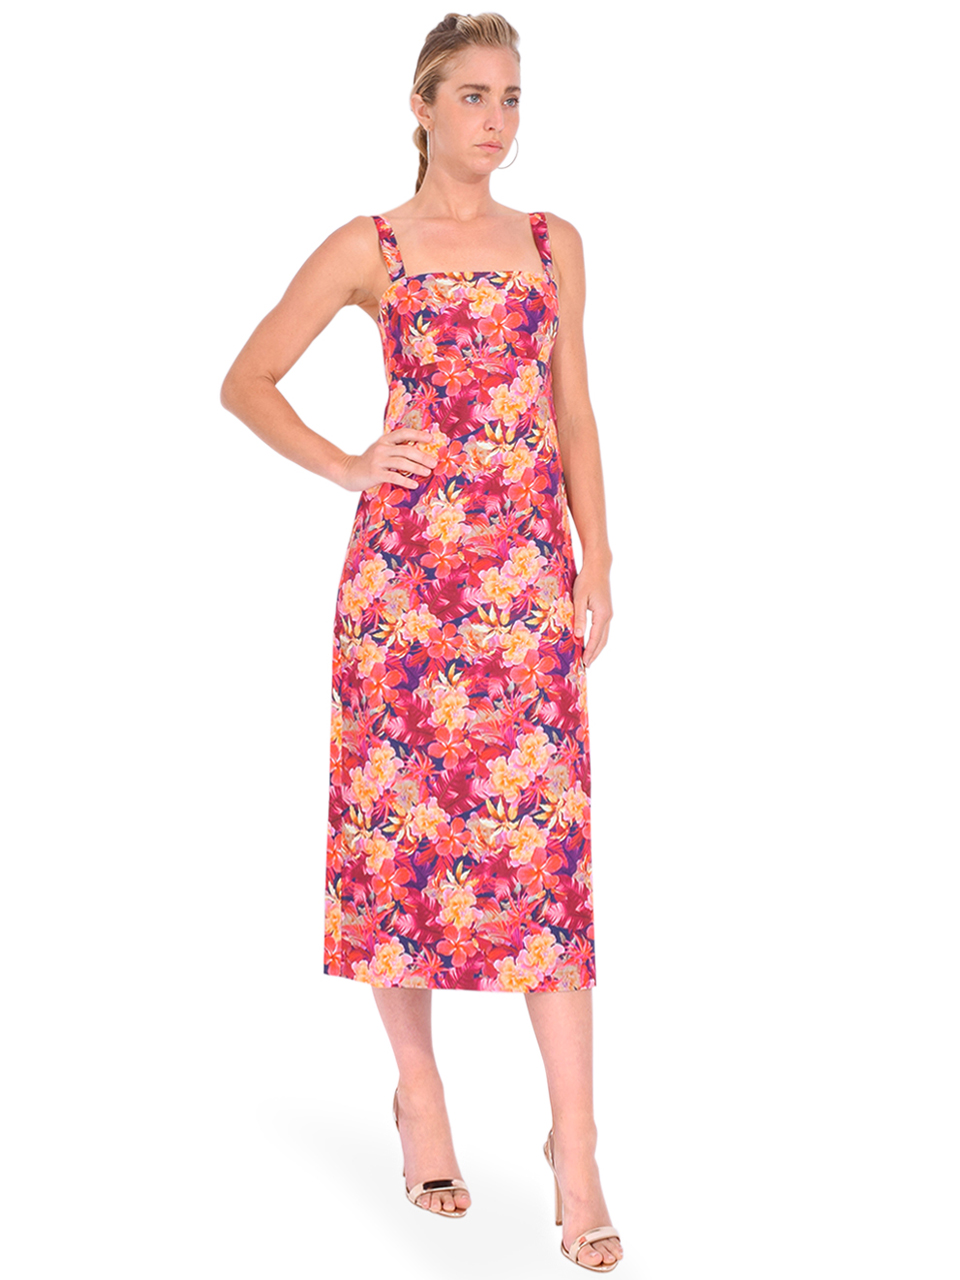 CAMI NYC Hema Dress in Paradise Side View 